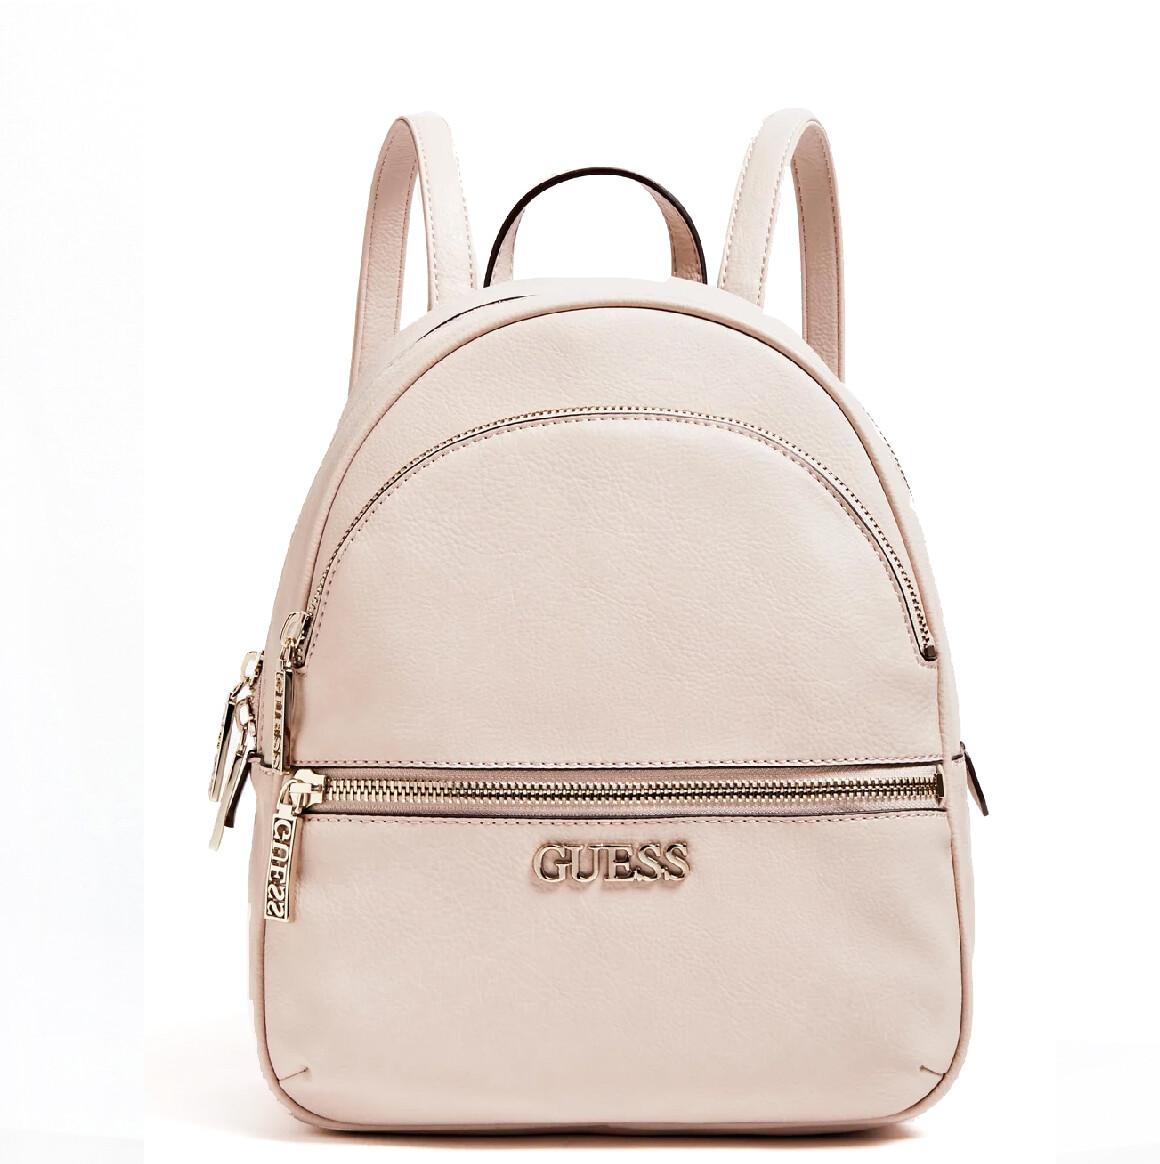 Guess Off White Backpack at FORZIERI